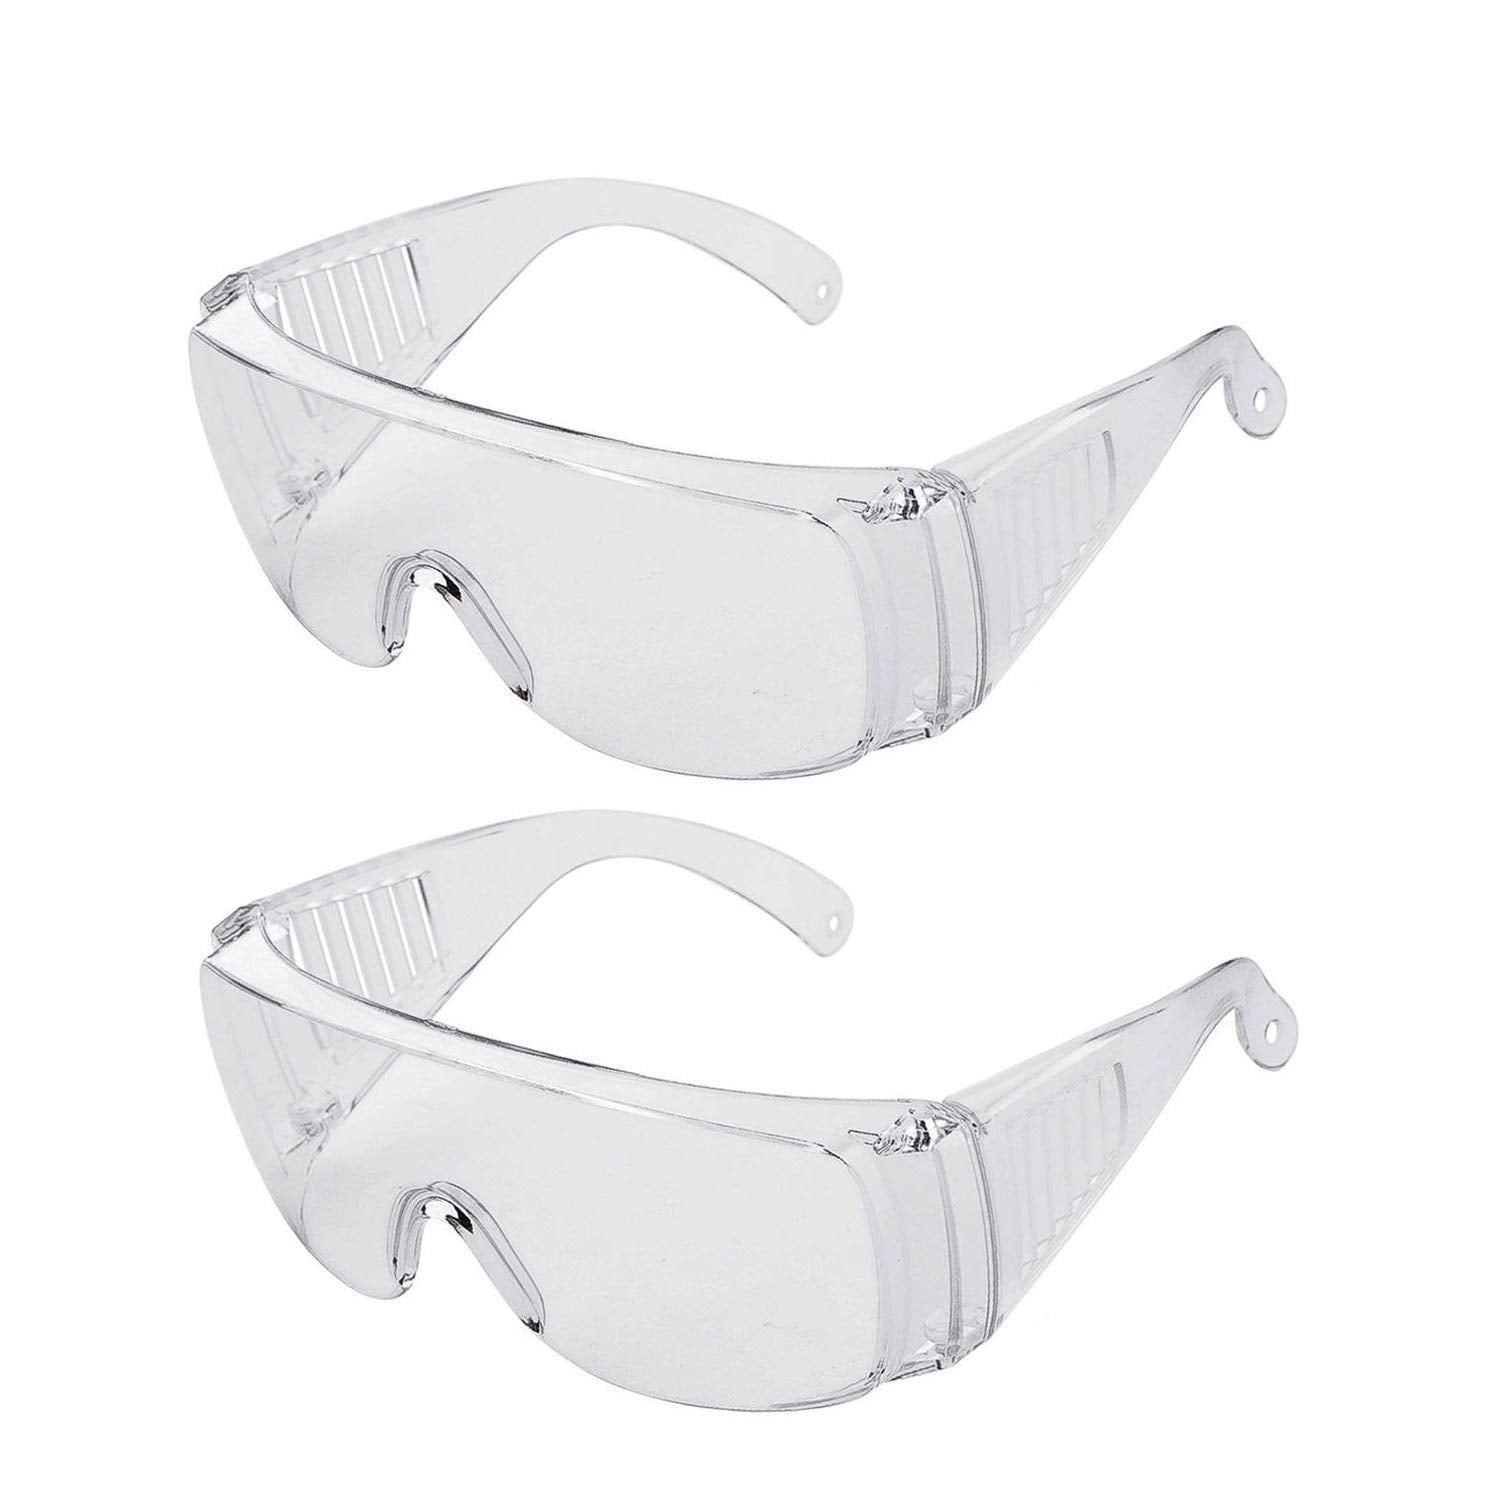 Details about   Safety Goggle Glasses Clear Goggles Anti Fog Protective Eye Eyewear 